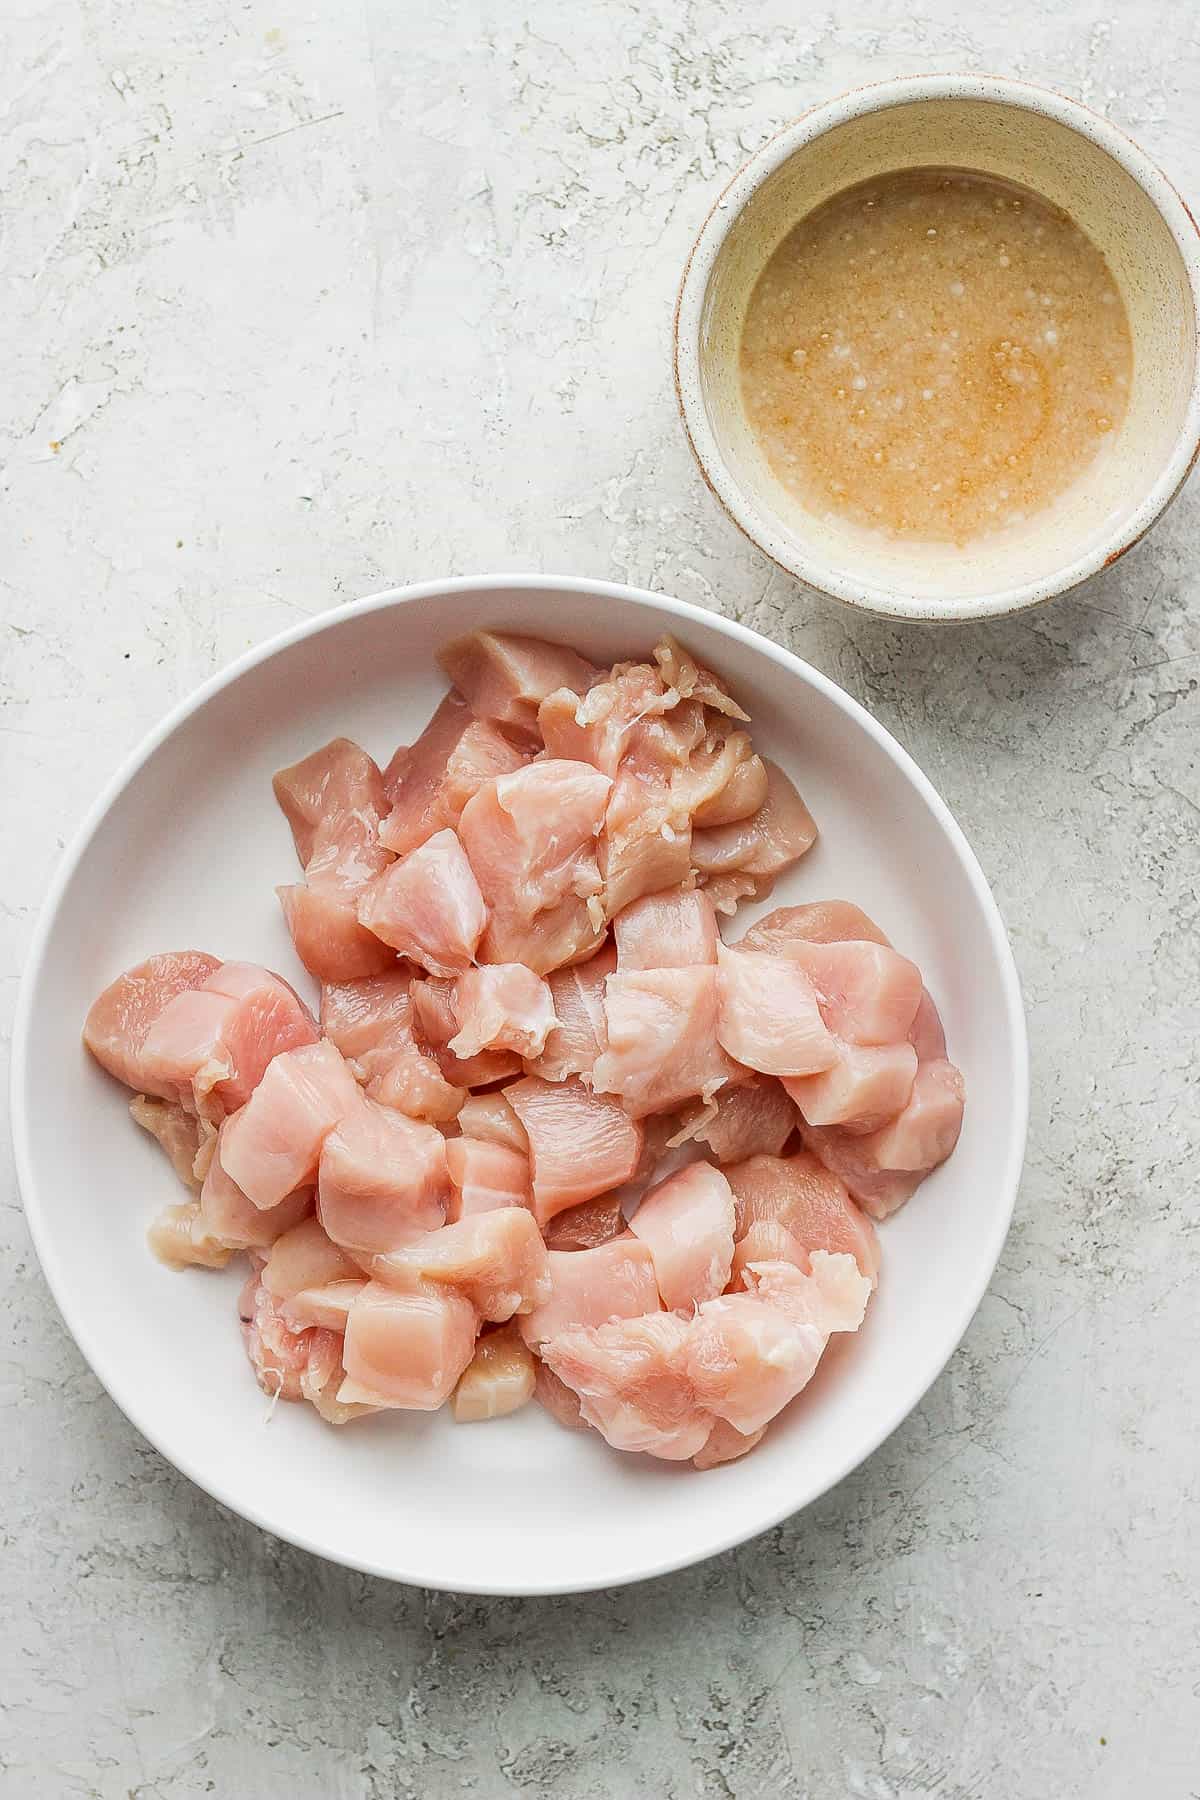 Raw chicken chunks in a white bowl and the marinade in another small bowl.